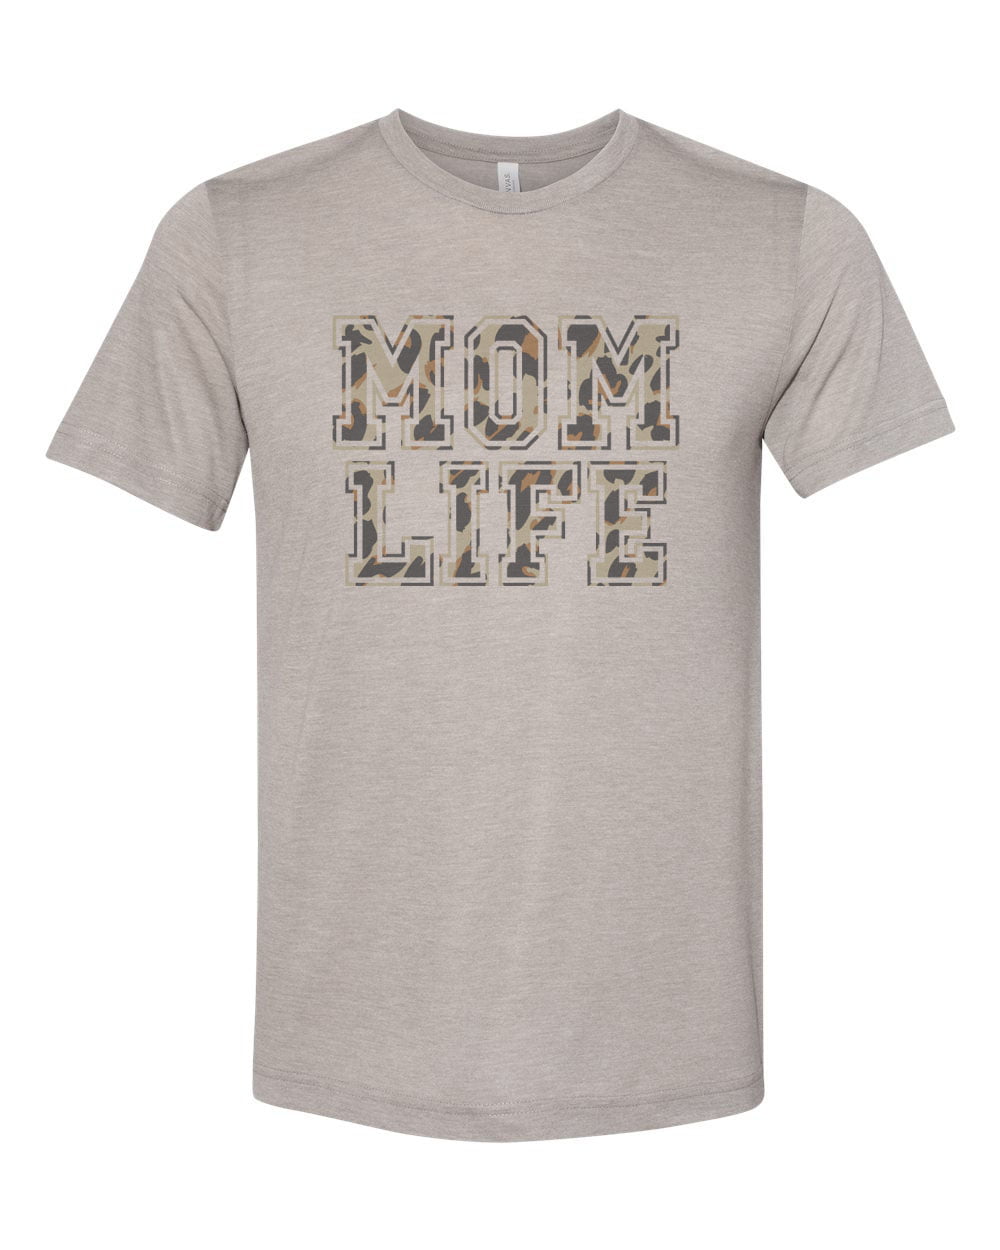 Wife Shirt Mom Shirt Gift For Mother Wife Mom Boss Shirt Leopard Print Mama Shirt Mom Life Tee Bella Canvas Shirt Gift For Mom